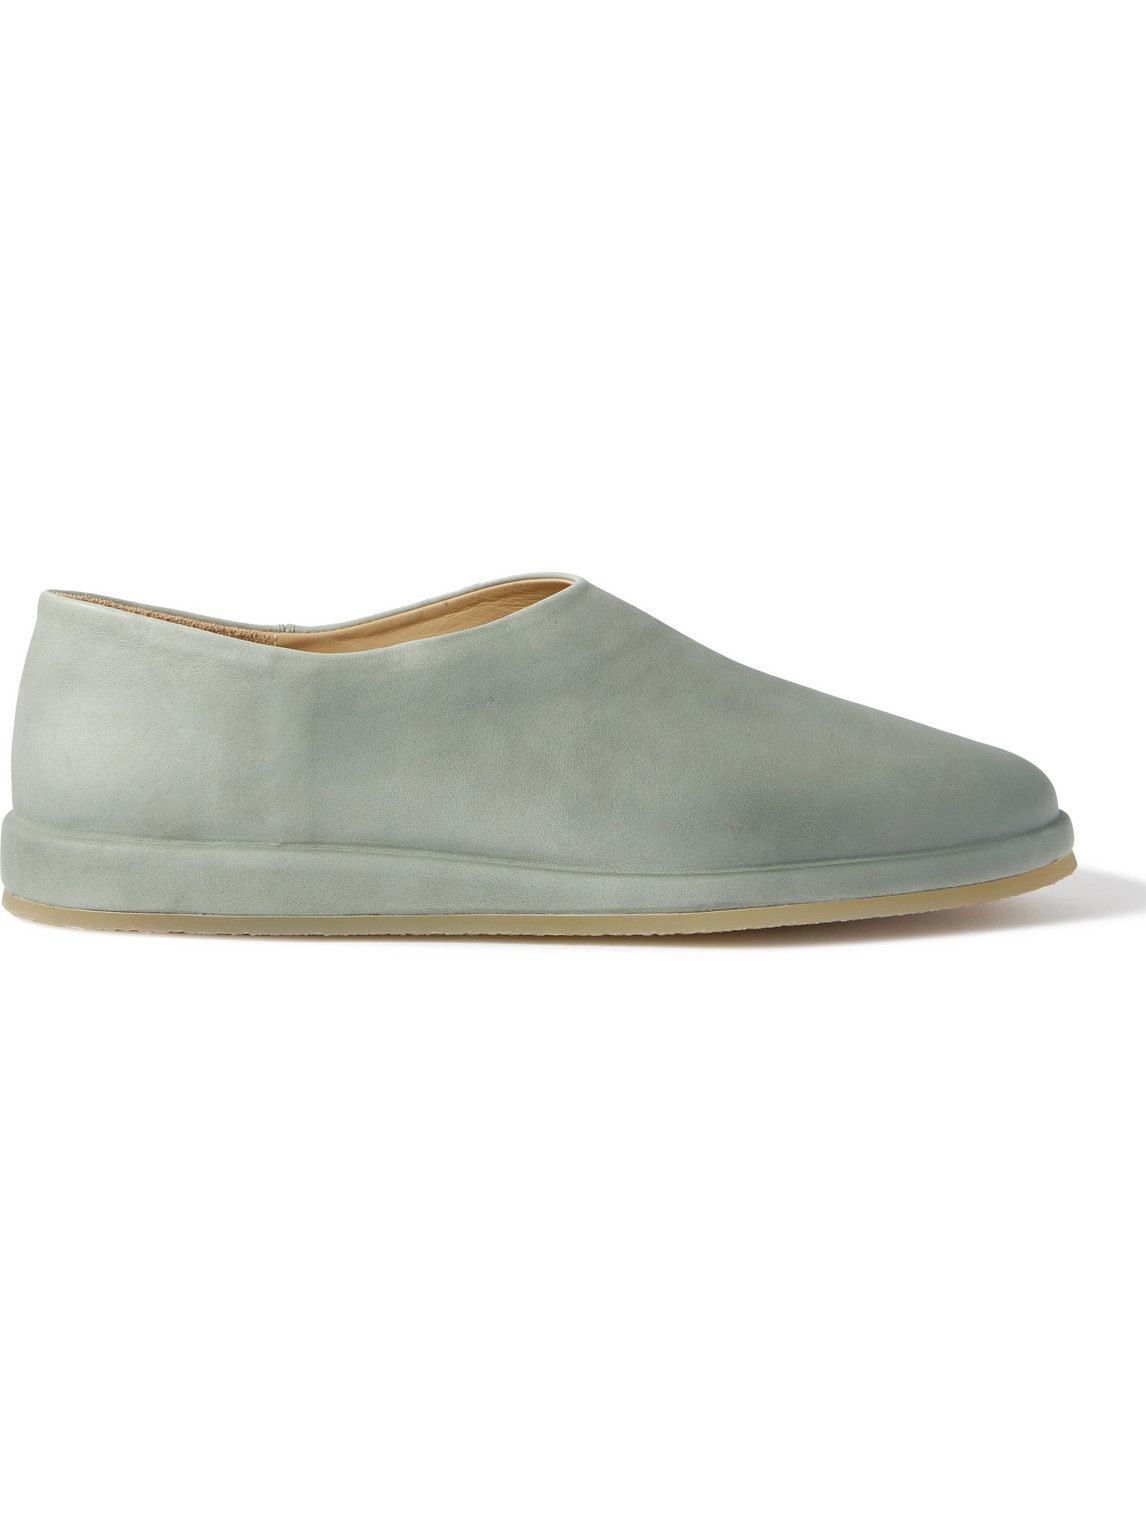 Fear of God - Cordovan Leather Loafers - Gray Fear Of God